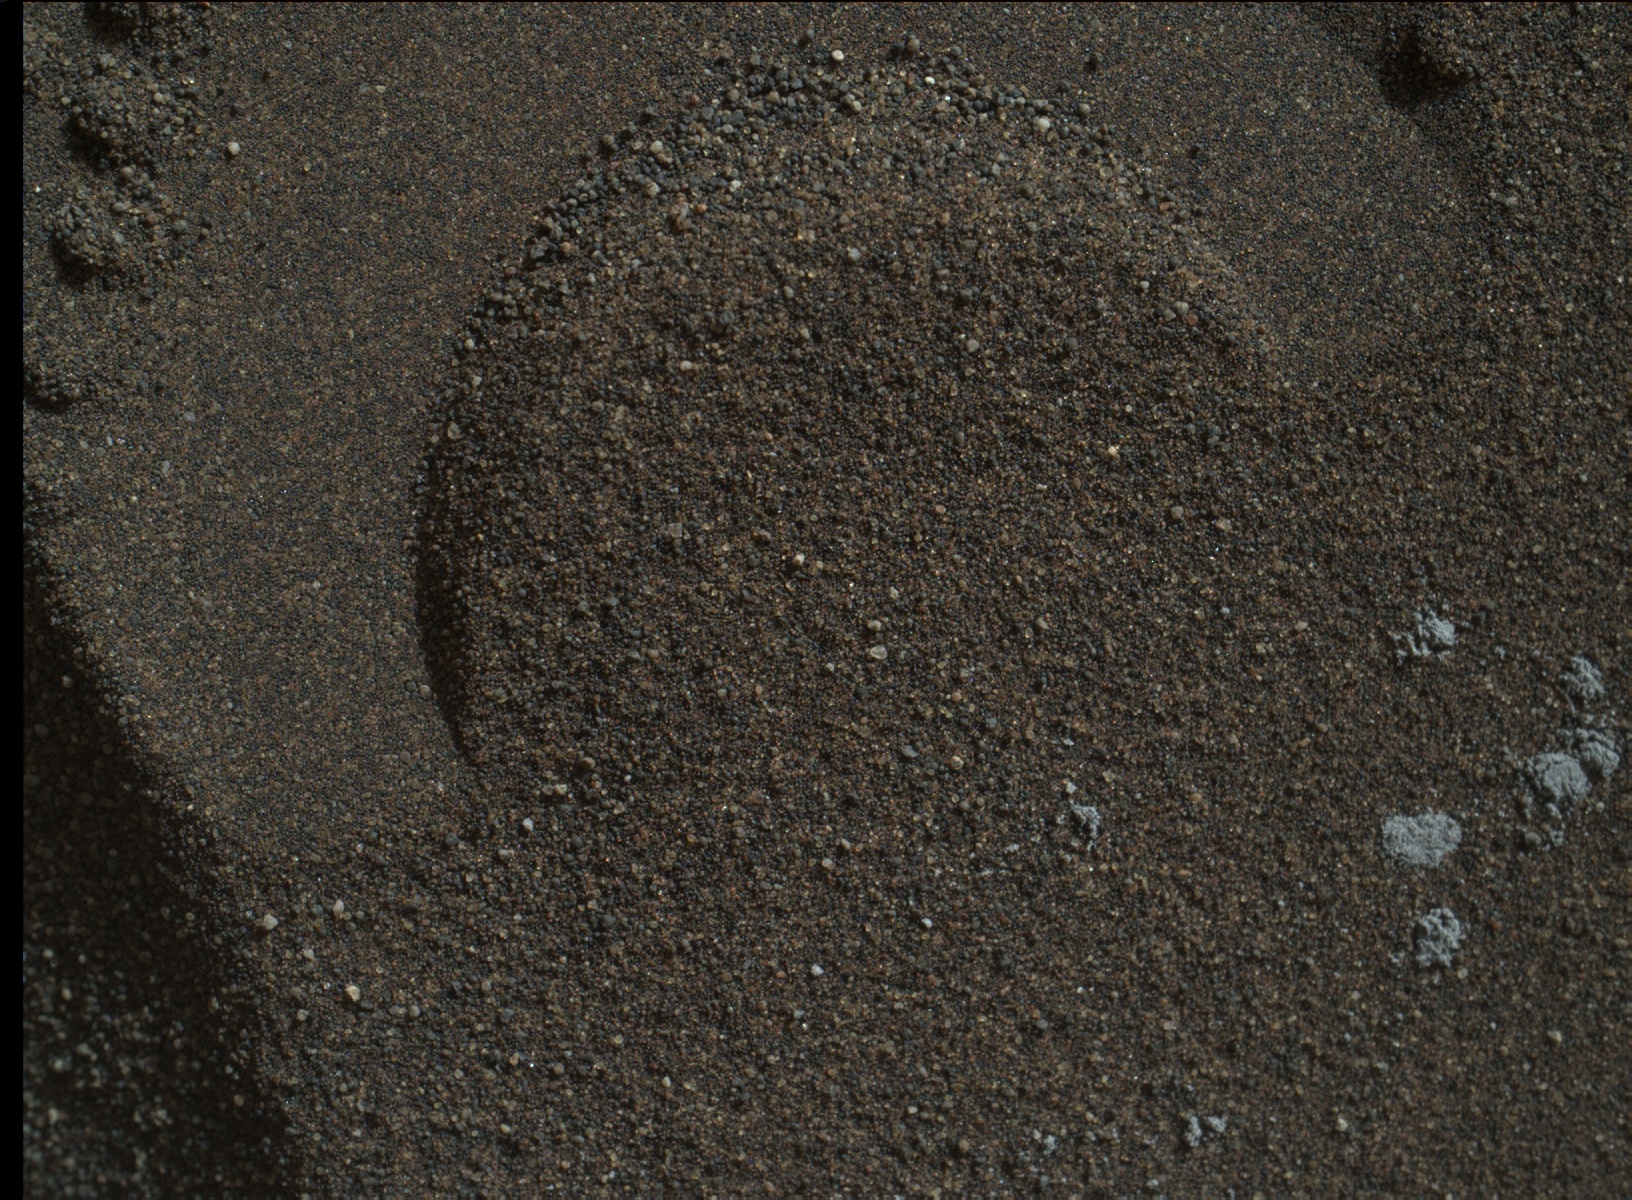 Nasa's Mars rover Curiosity acquired this image using its Mars Hand Lens Imager (MAHLI) on Sol 1226